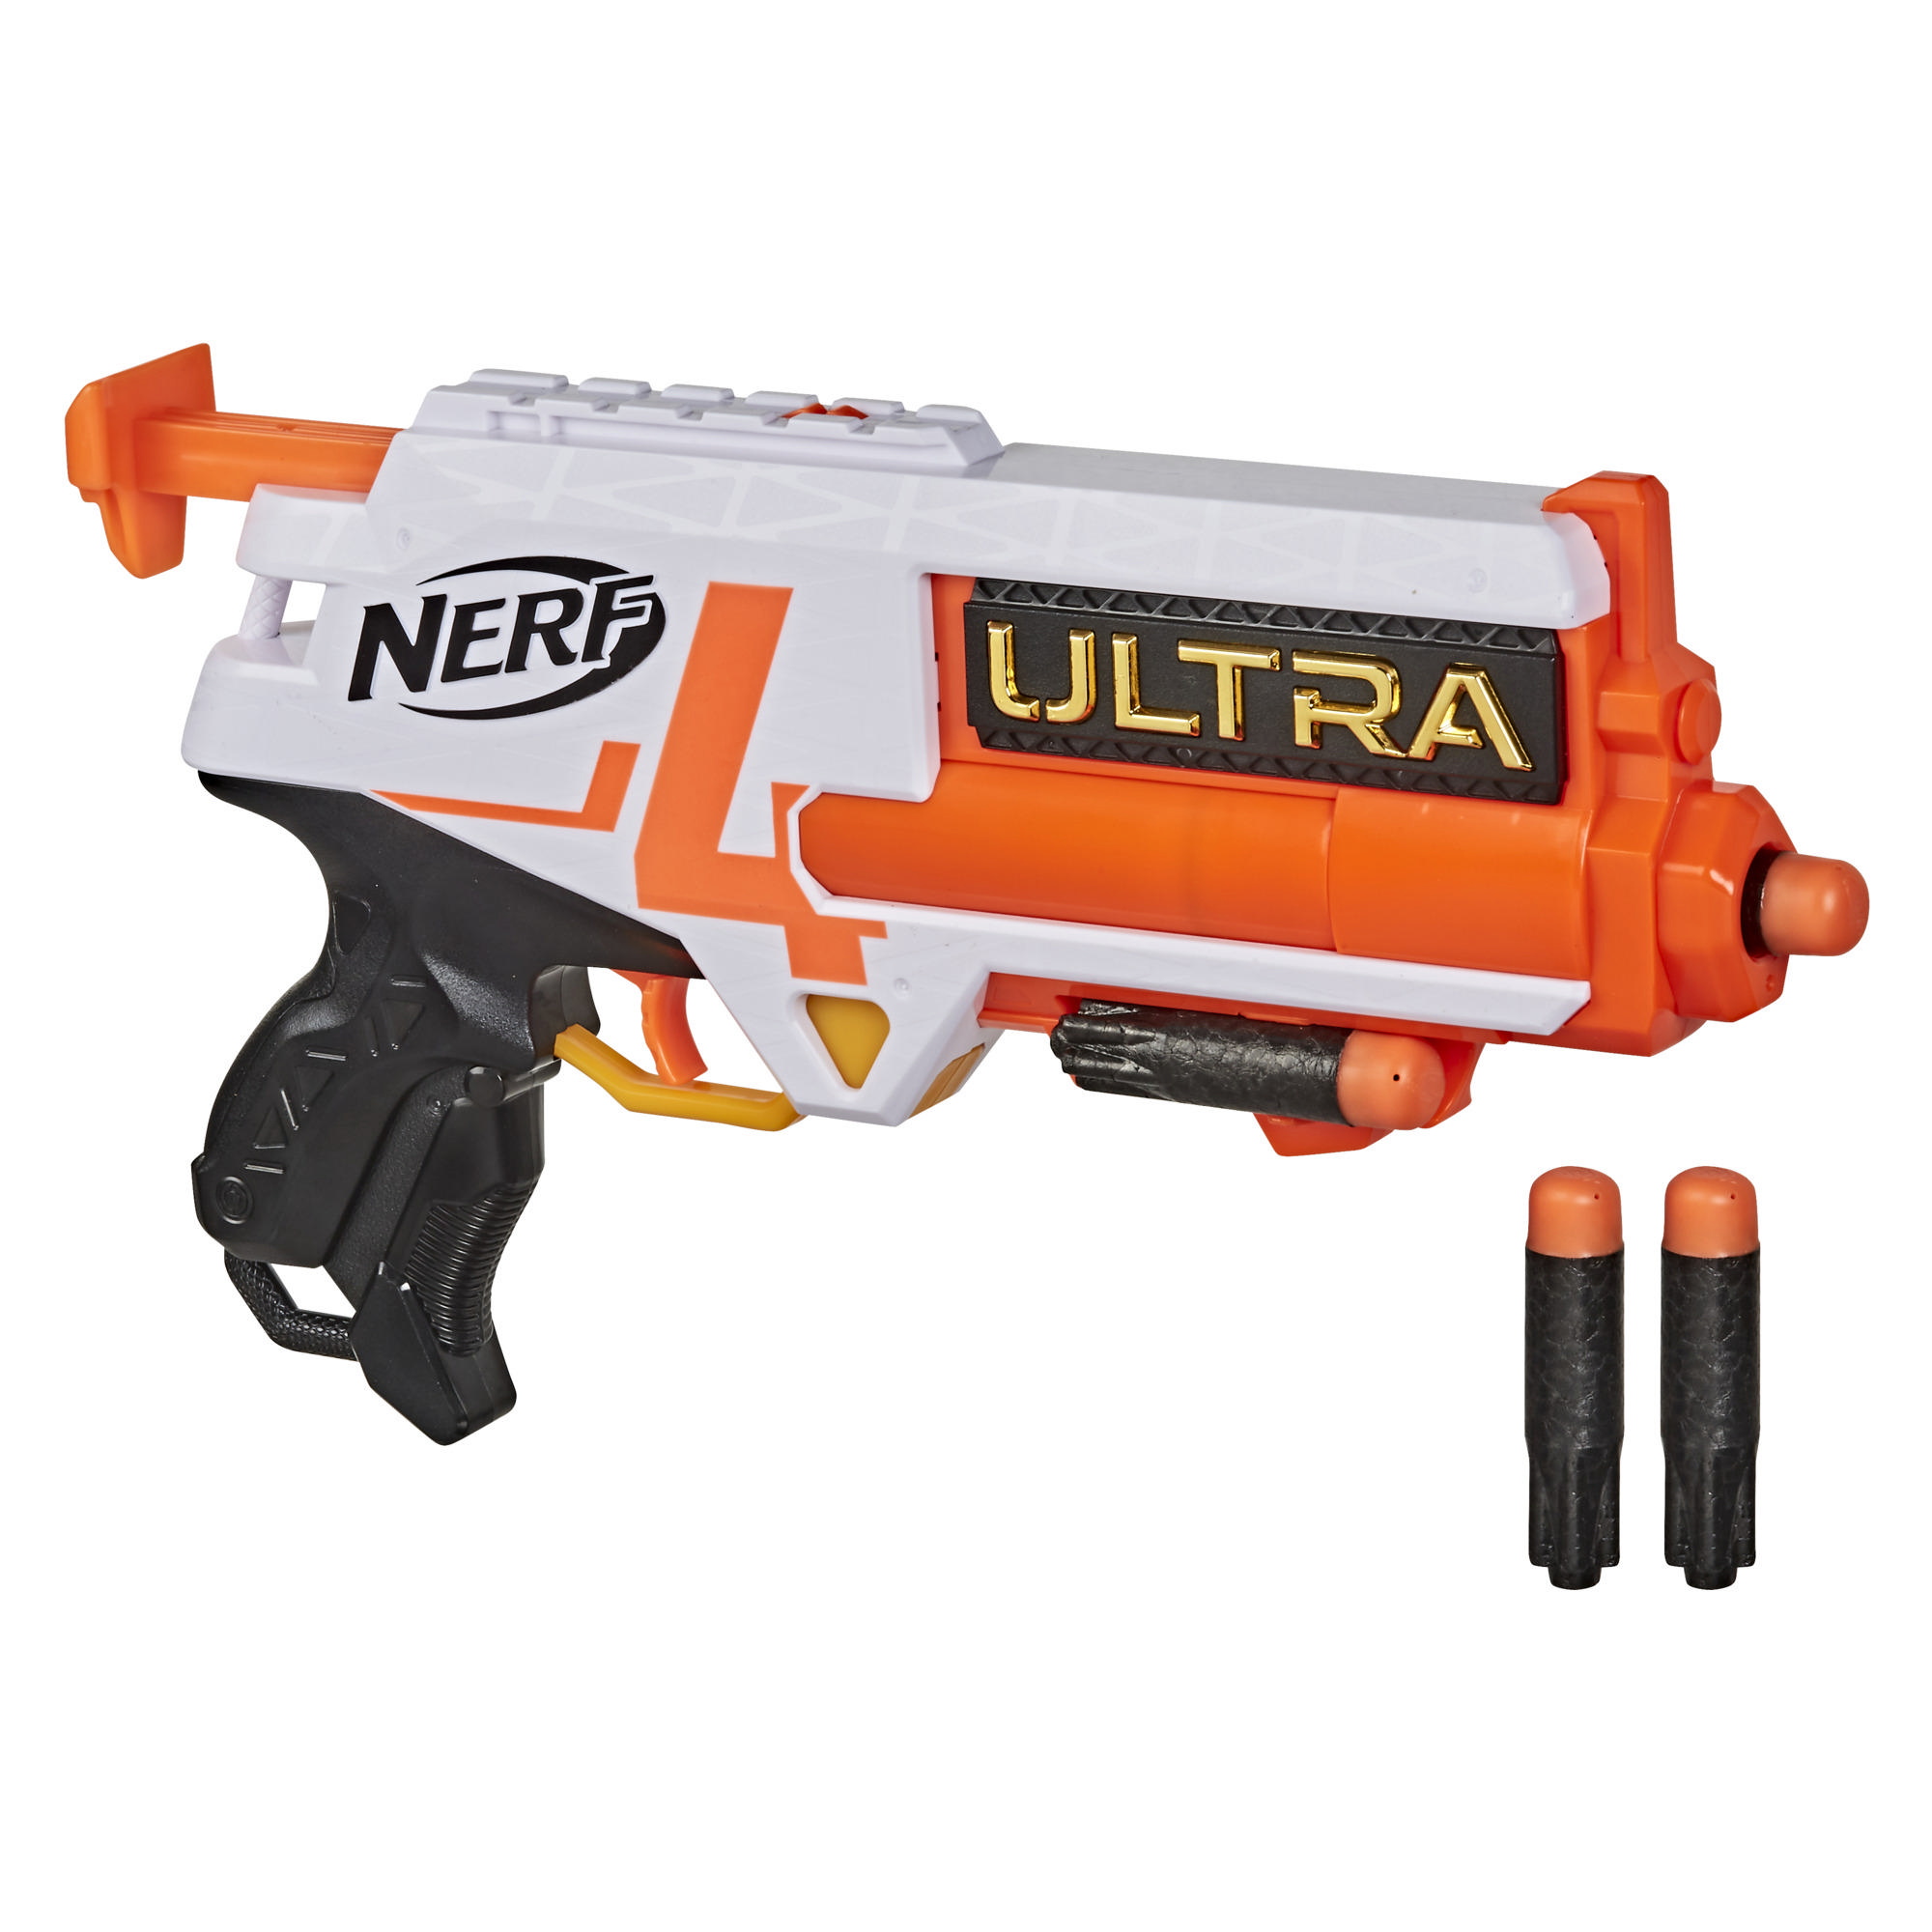 Nerf Ultra Four Dart Blaster -- 4 Nerf Ultra Darts, Single-Shot Blasting, Compatible Only with Nerf Ultra Darts